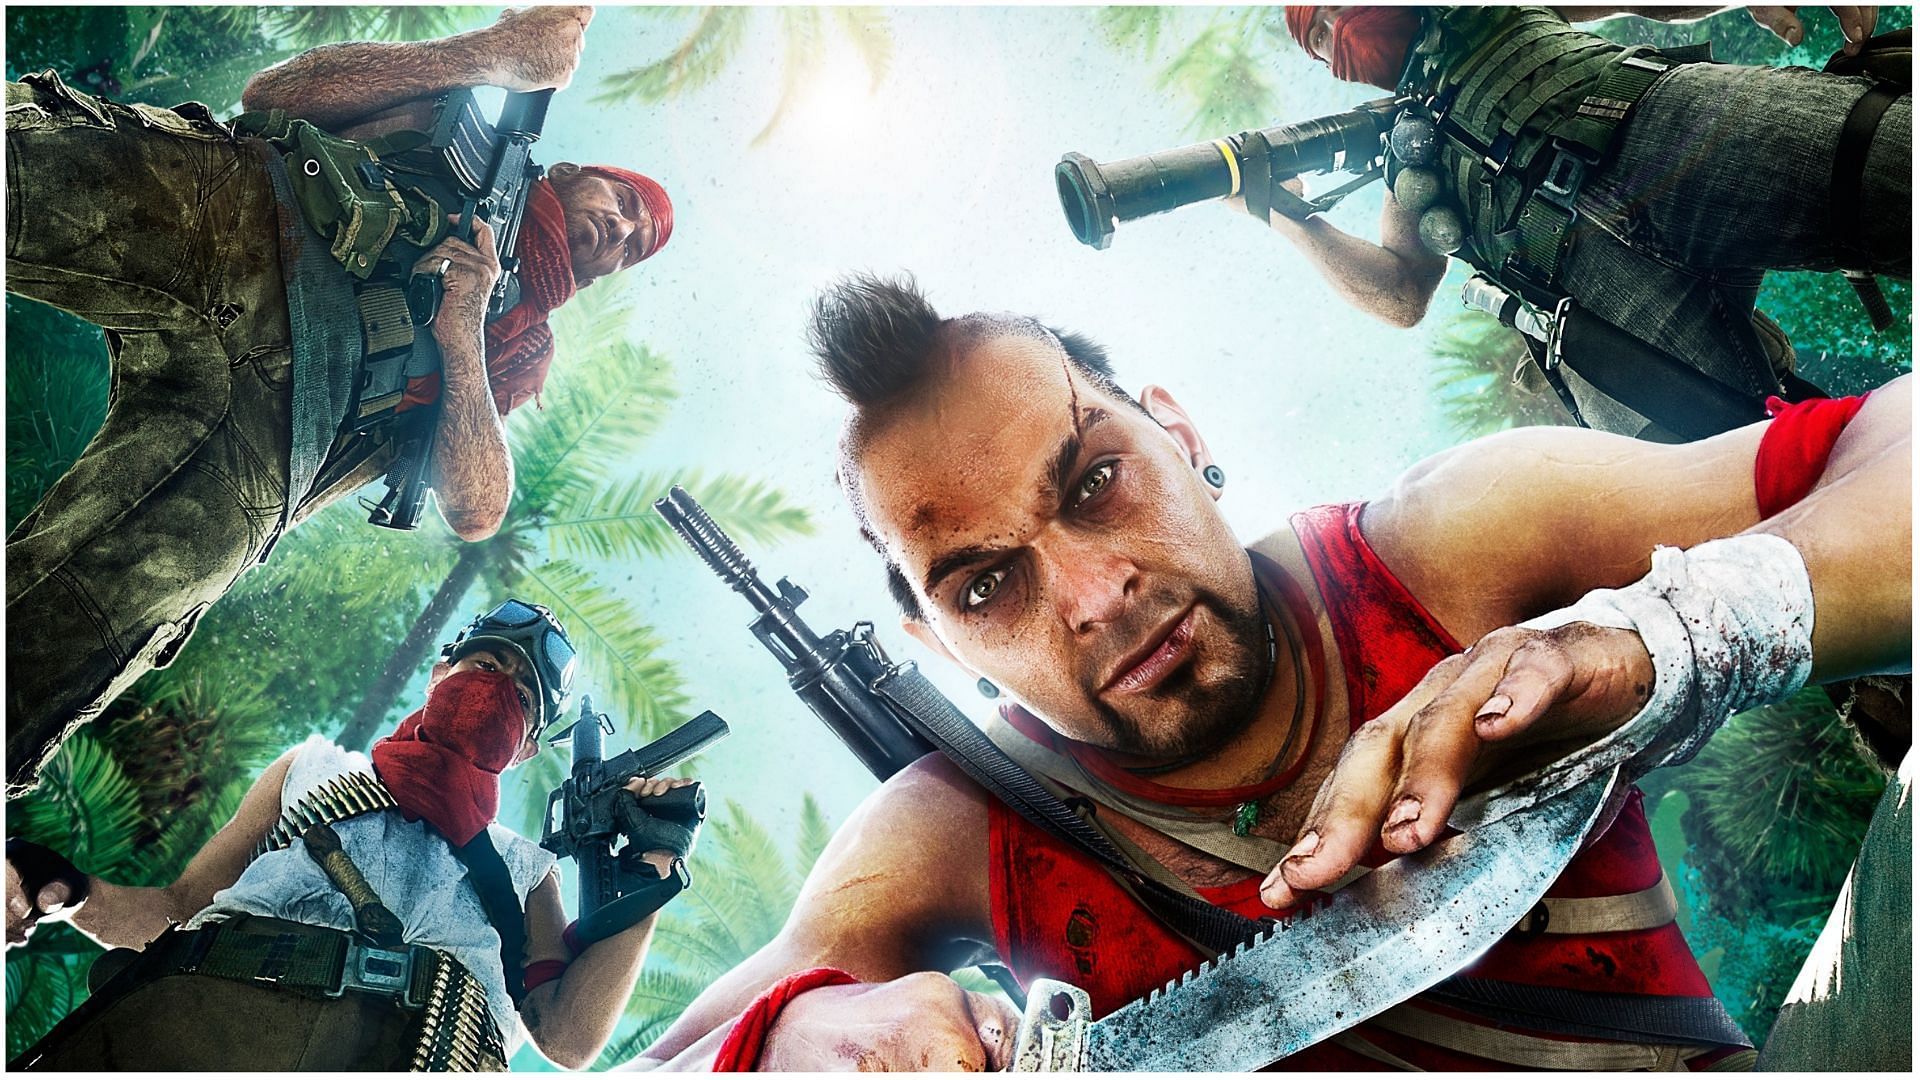 Vaas Montenegro is one of the most interesting video game antagonists ever (Image via Ubisoft)